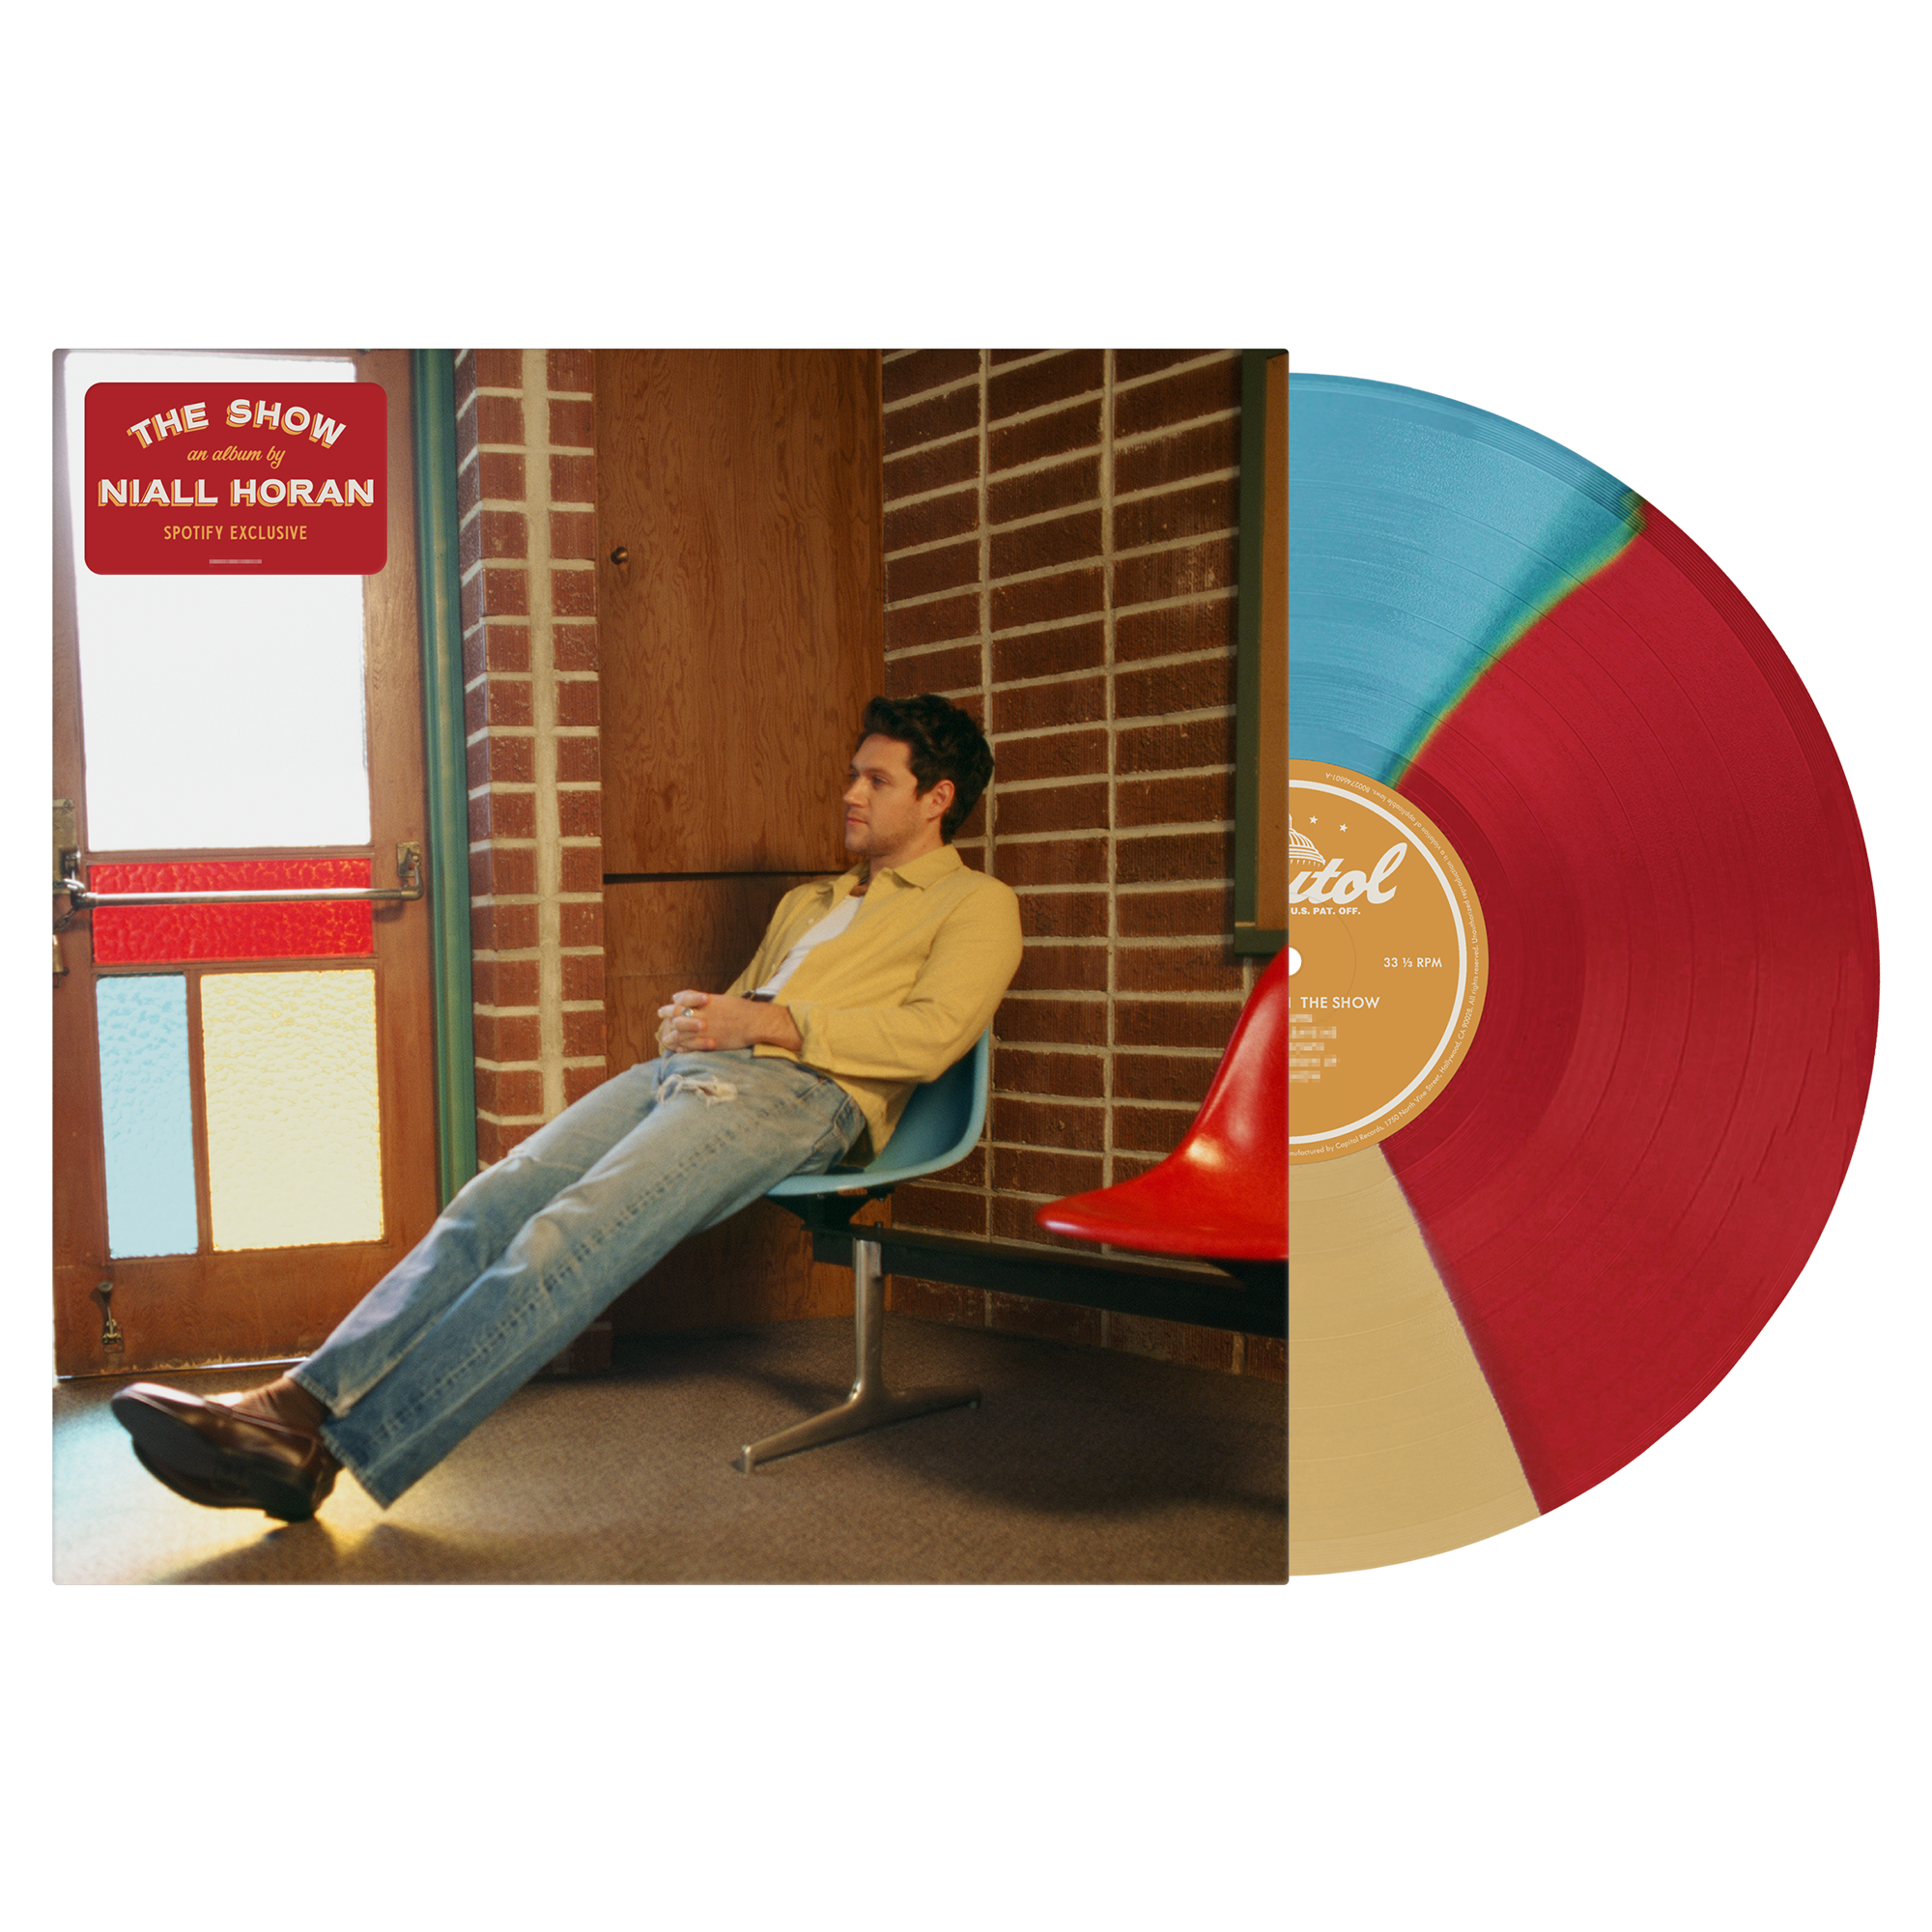 Niall Horan - The Show - Spotify Exclusive Vinyl